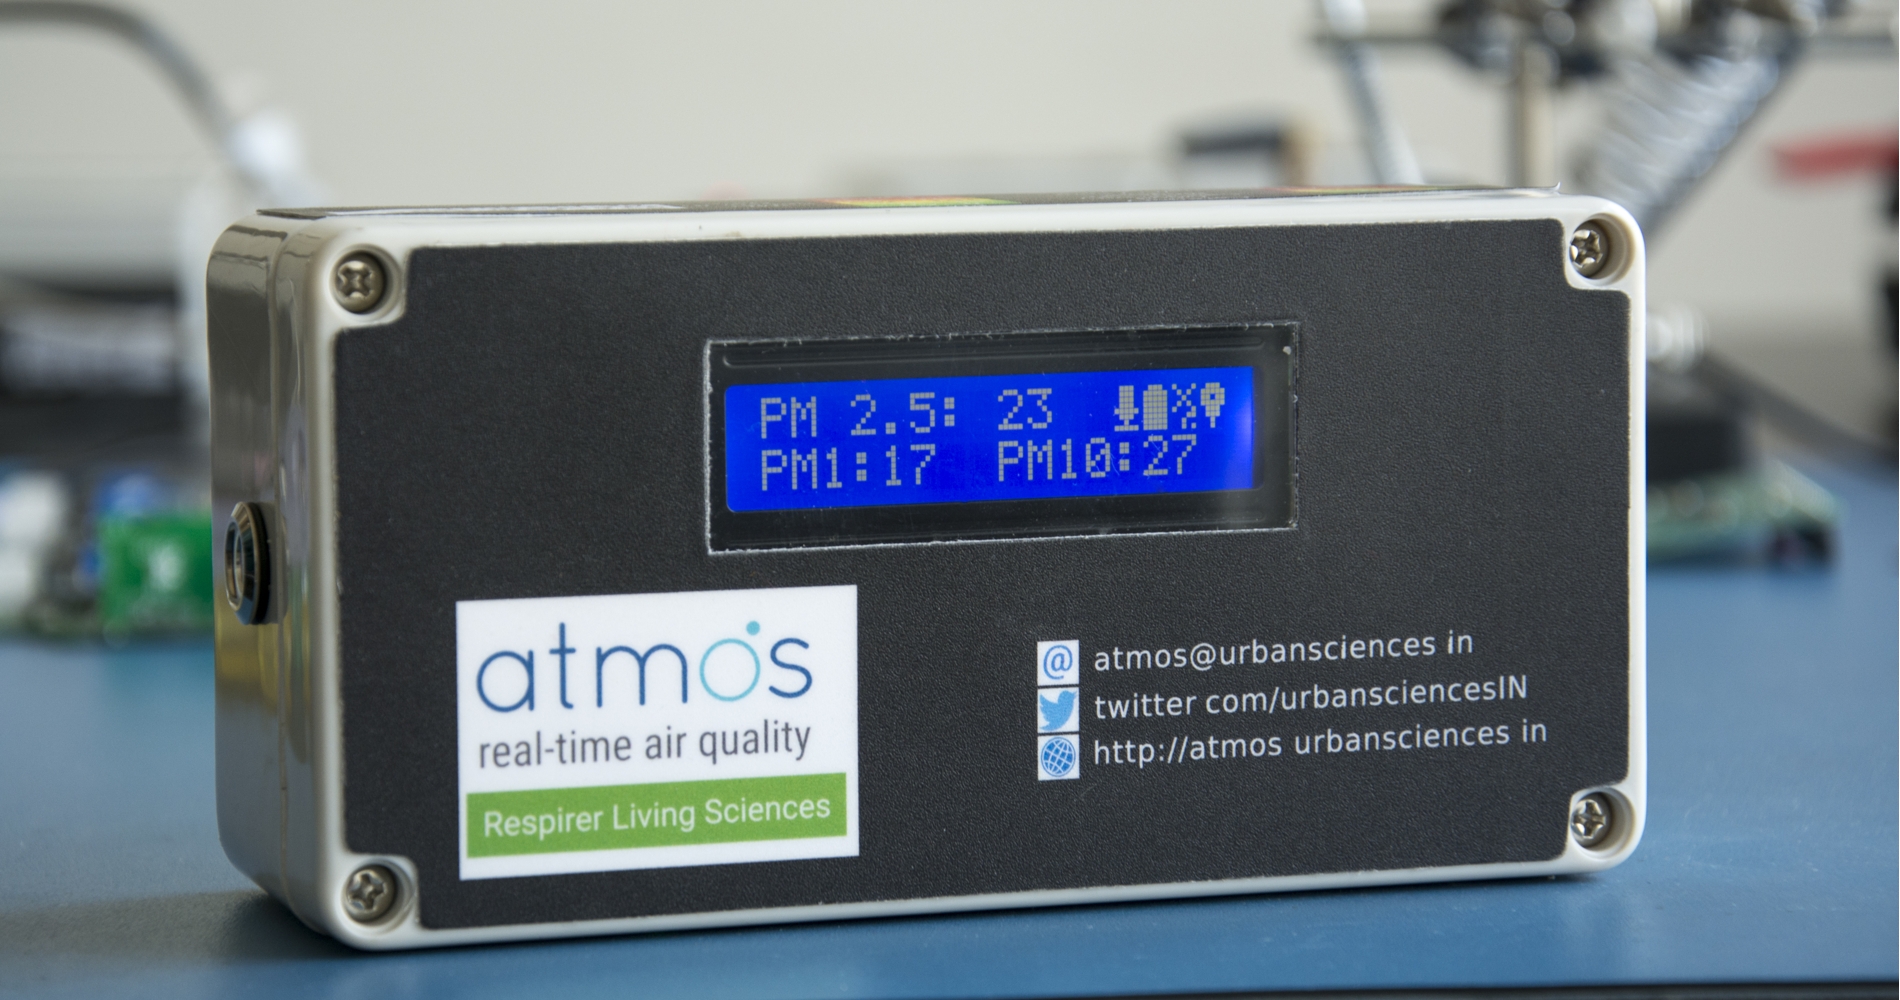 Photo of an air quality monitoring gadget called the Atmos